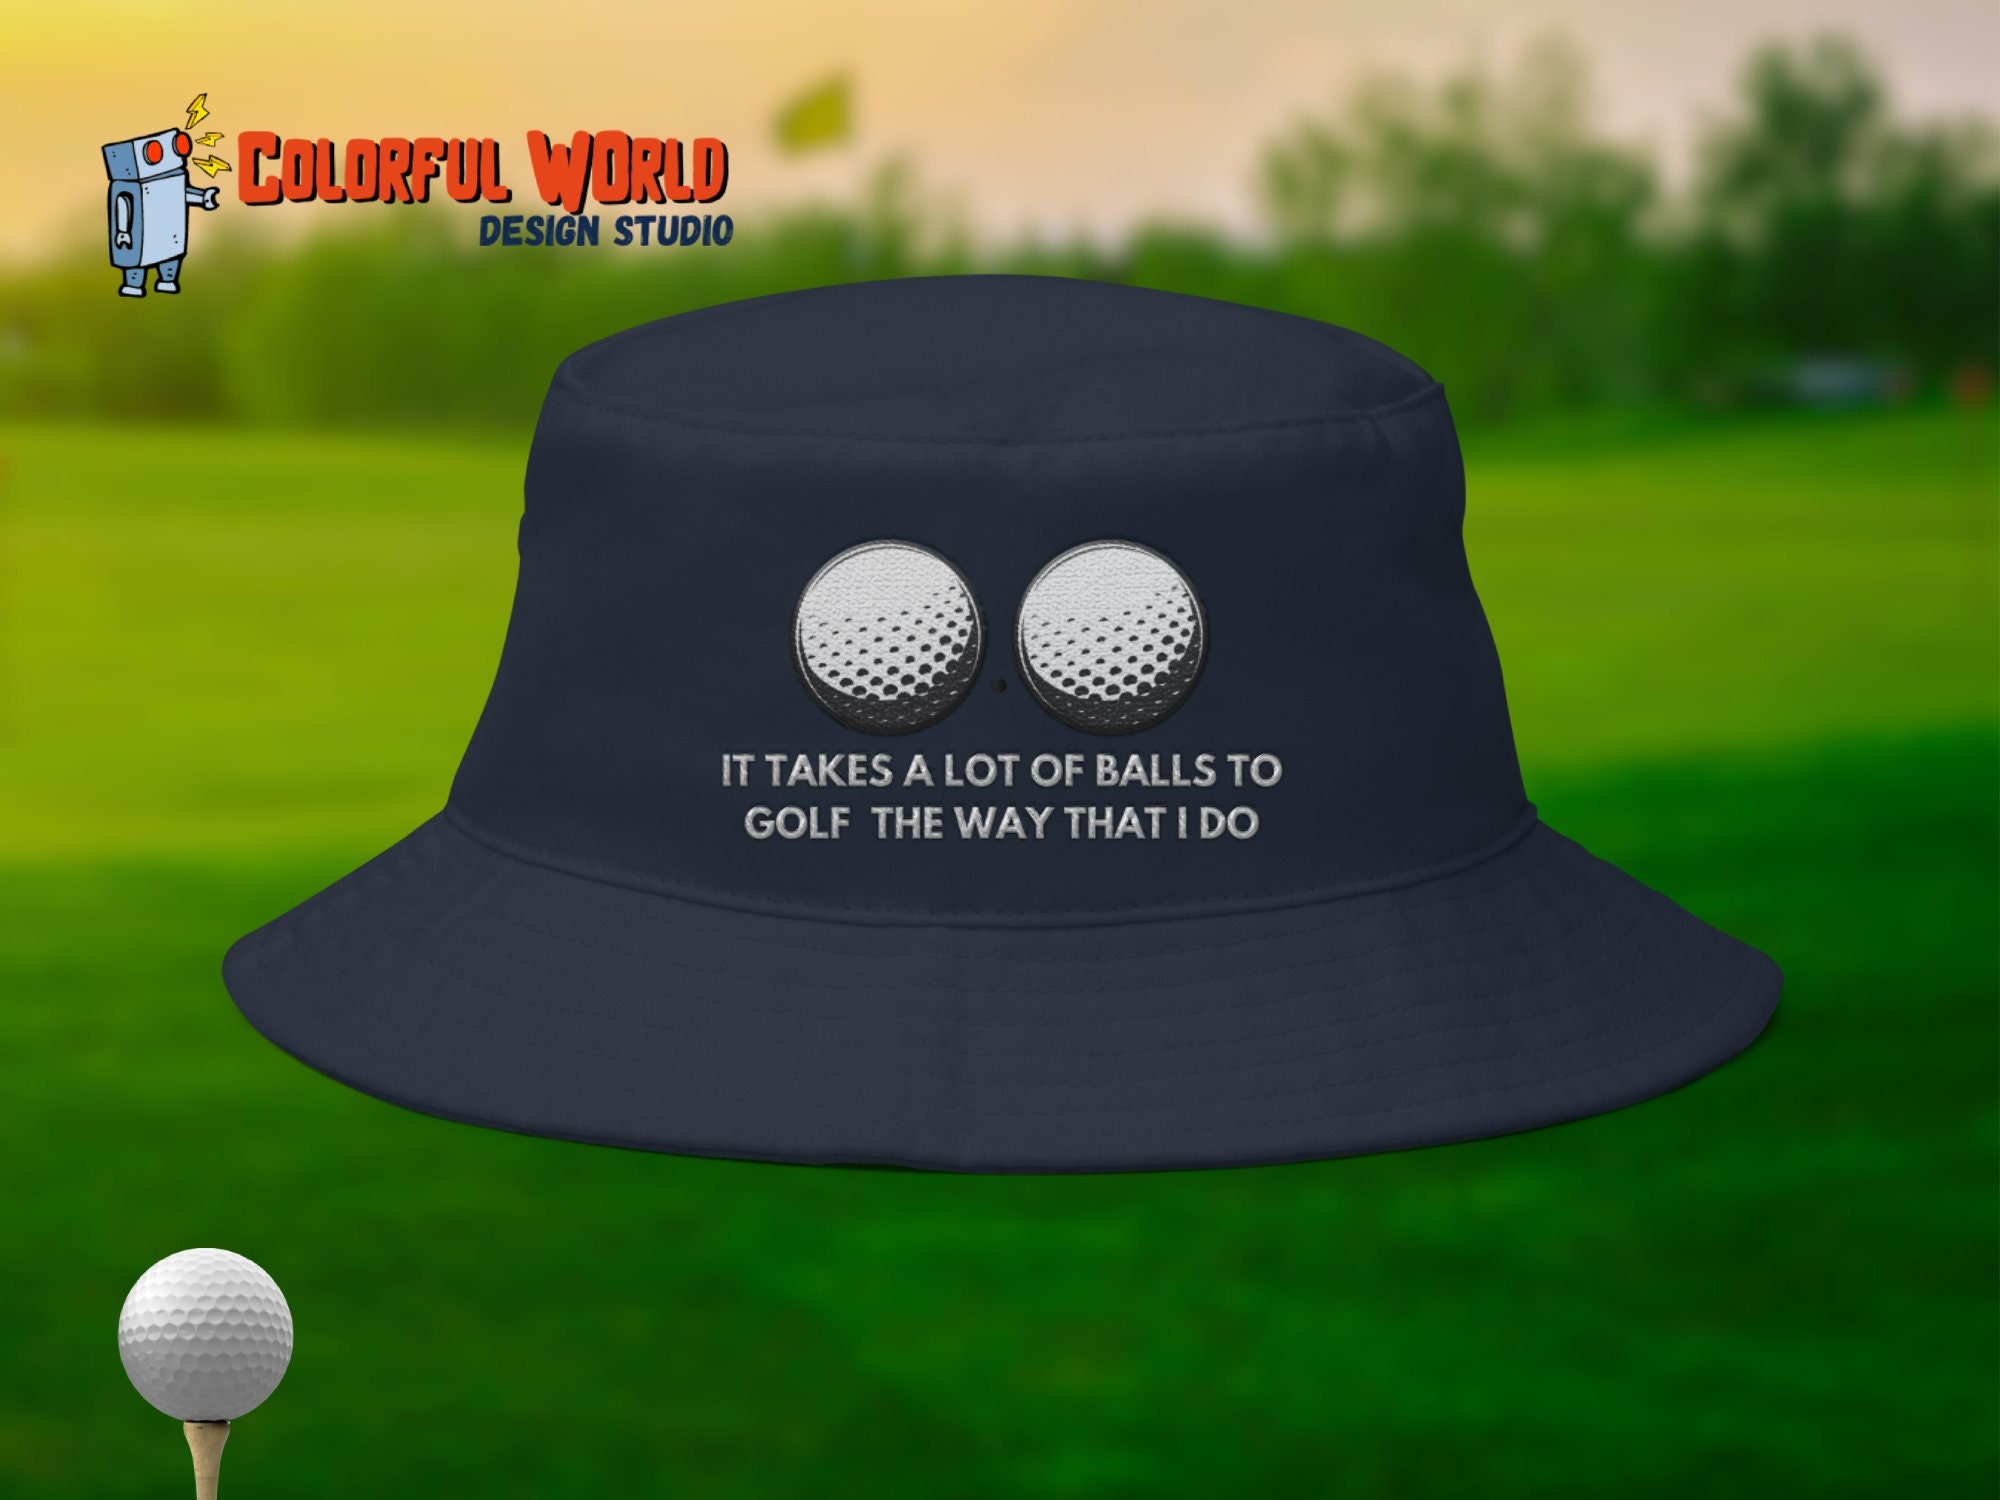 It Takes a Lot of Balls to Golf the Way That I Do Bucket Hat Funny Golf  Embriodered Bucket Cap Unisex Summertime Gift 